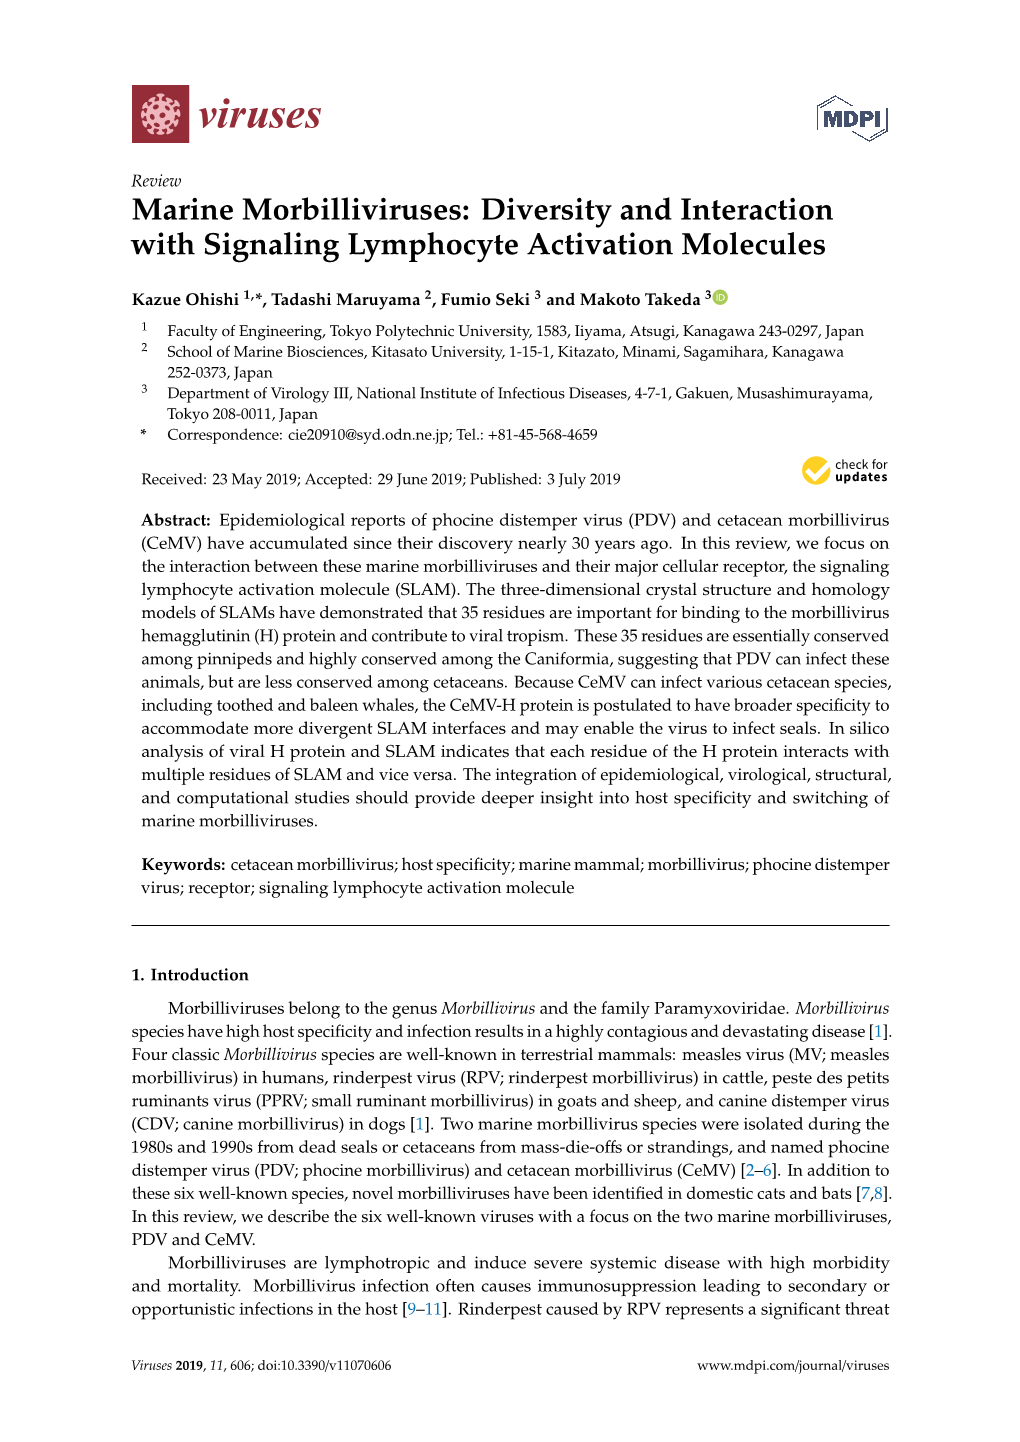 Marine Morbilliviruses: Diversity and Interaction with Signaling Lymphocyte Activation Molecules